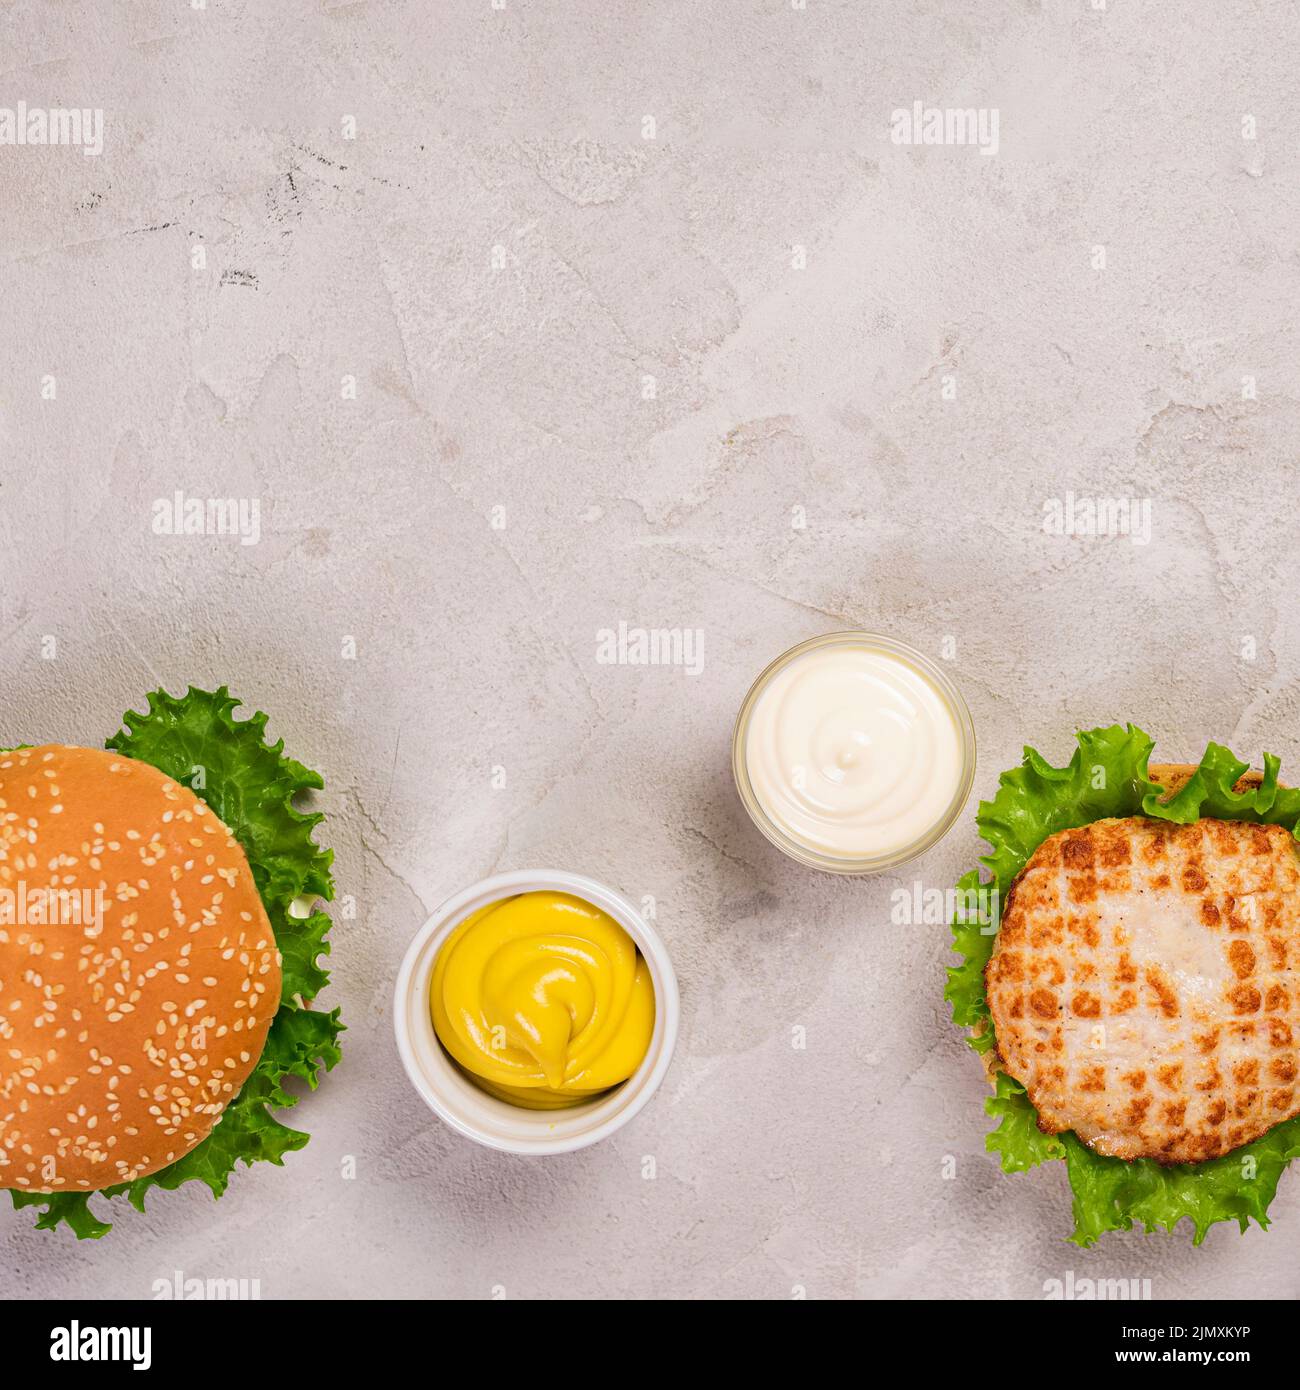 Top view burgers with mayo mustard dip Stock Photo